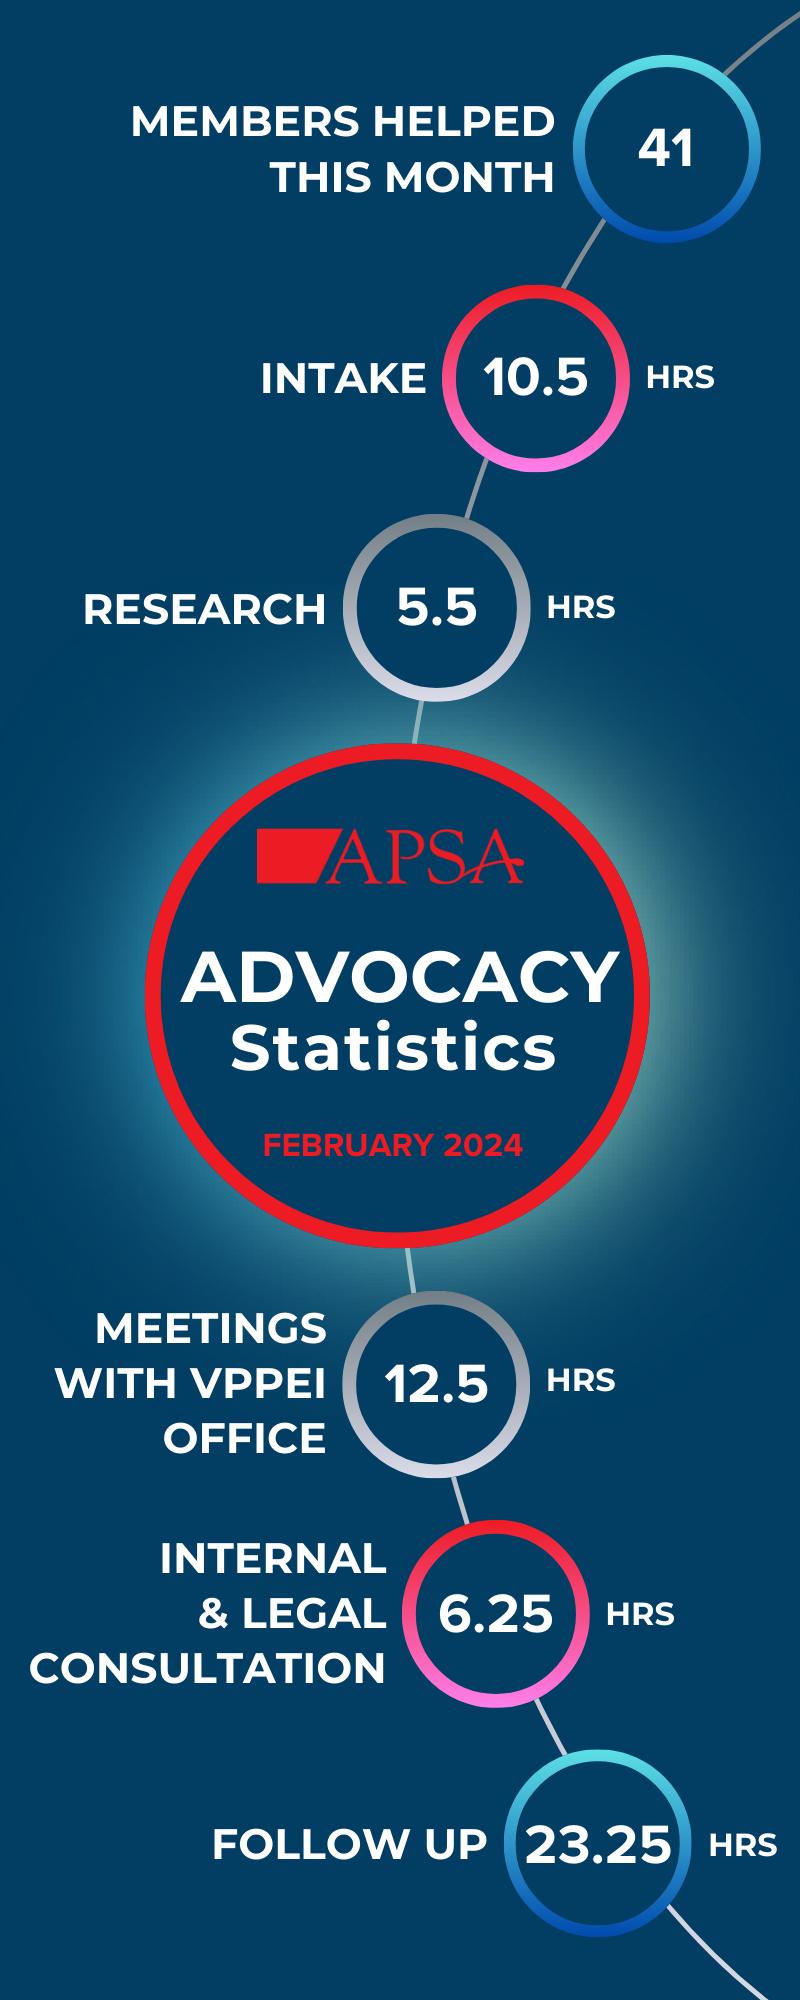 APSA Advocacy Stats for February 2024